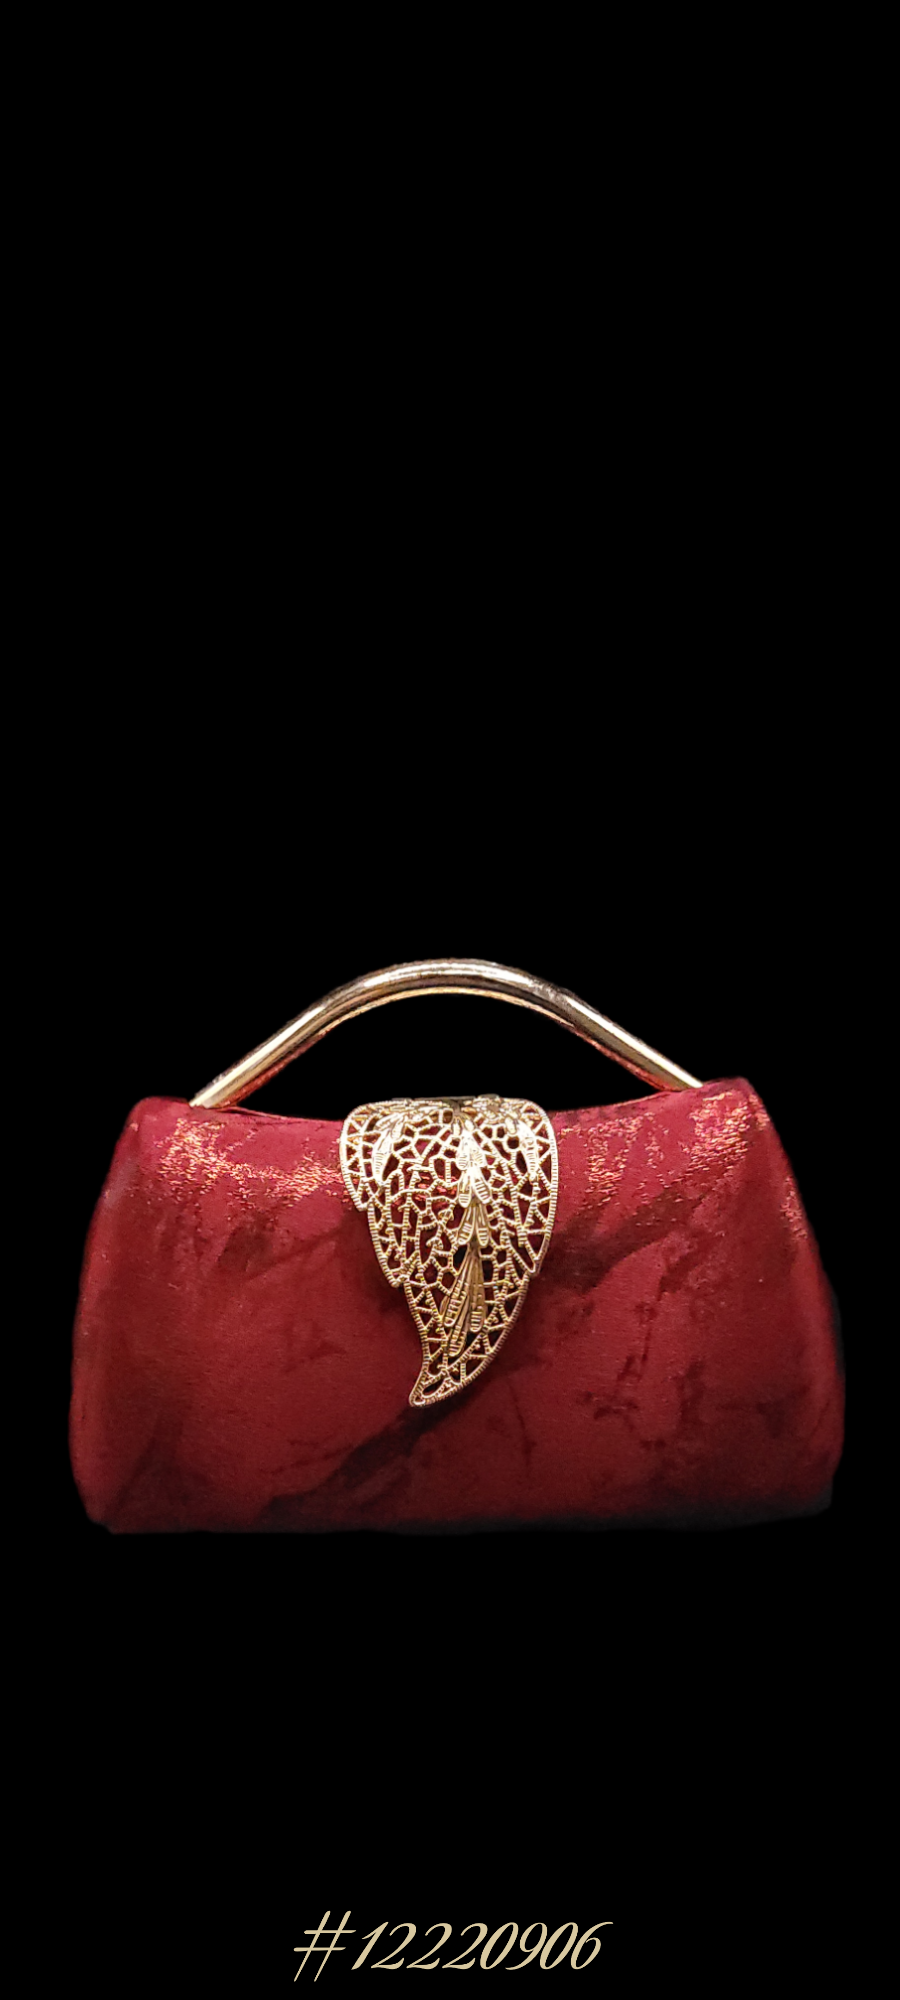 ELEGANT SMALL RED WITH GOLD LEAF DESIGN CLUTCH